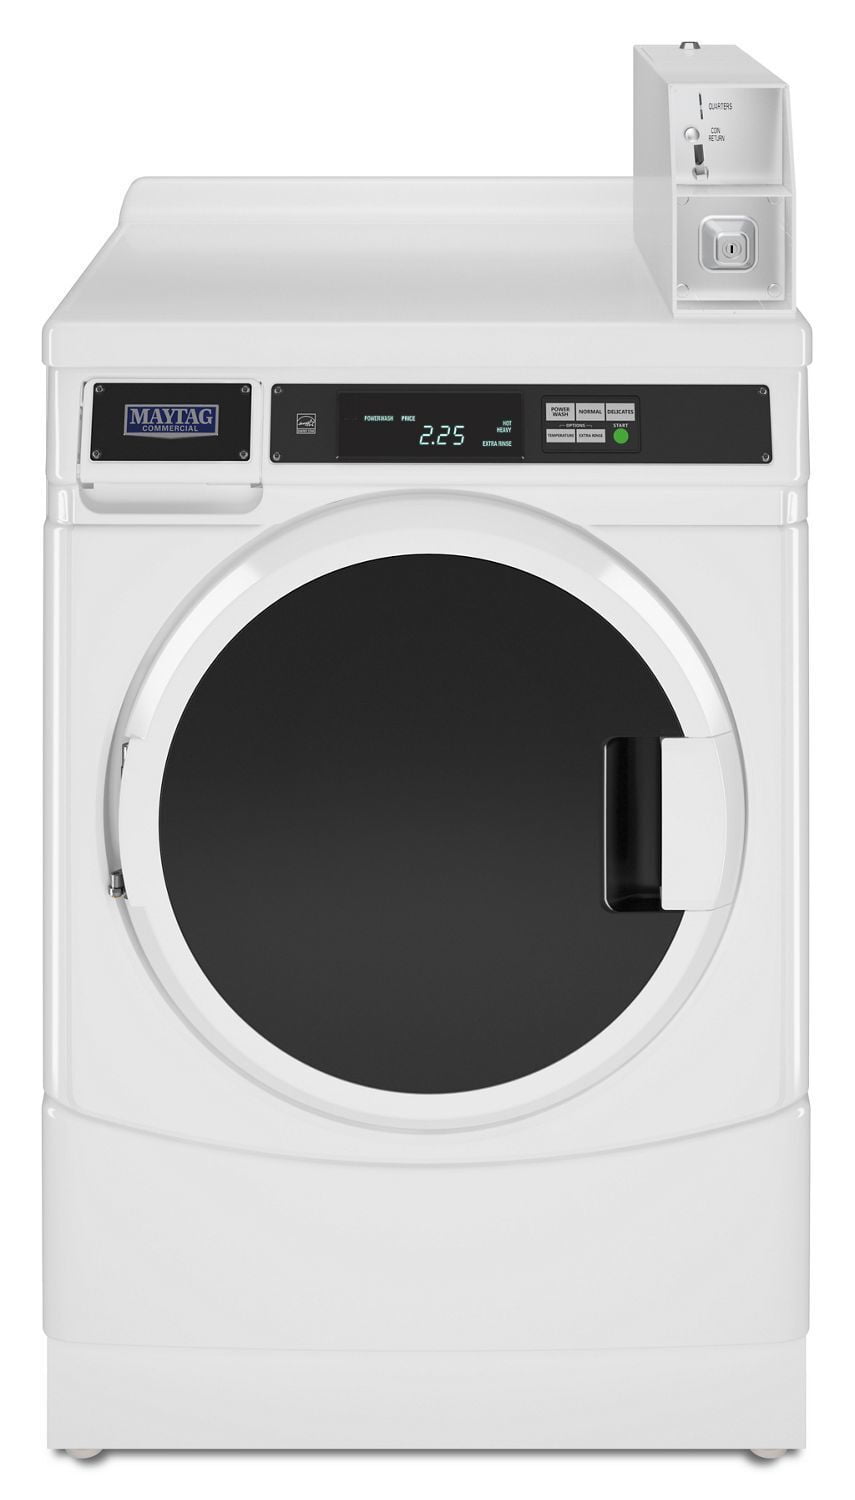 Whirlpool CHW9150GW 27" Commercial High-Efficiency Energy Star-Qualified Front-Load Washer Featuring Factory-Installed Coin Drop With Coin Box White